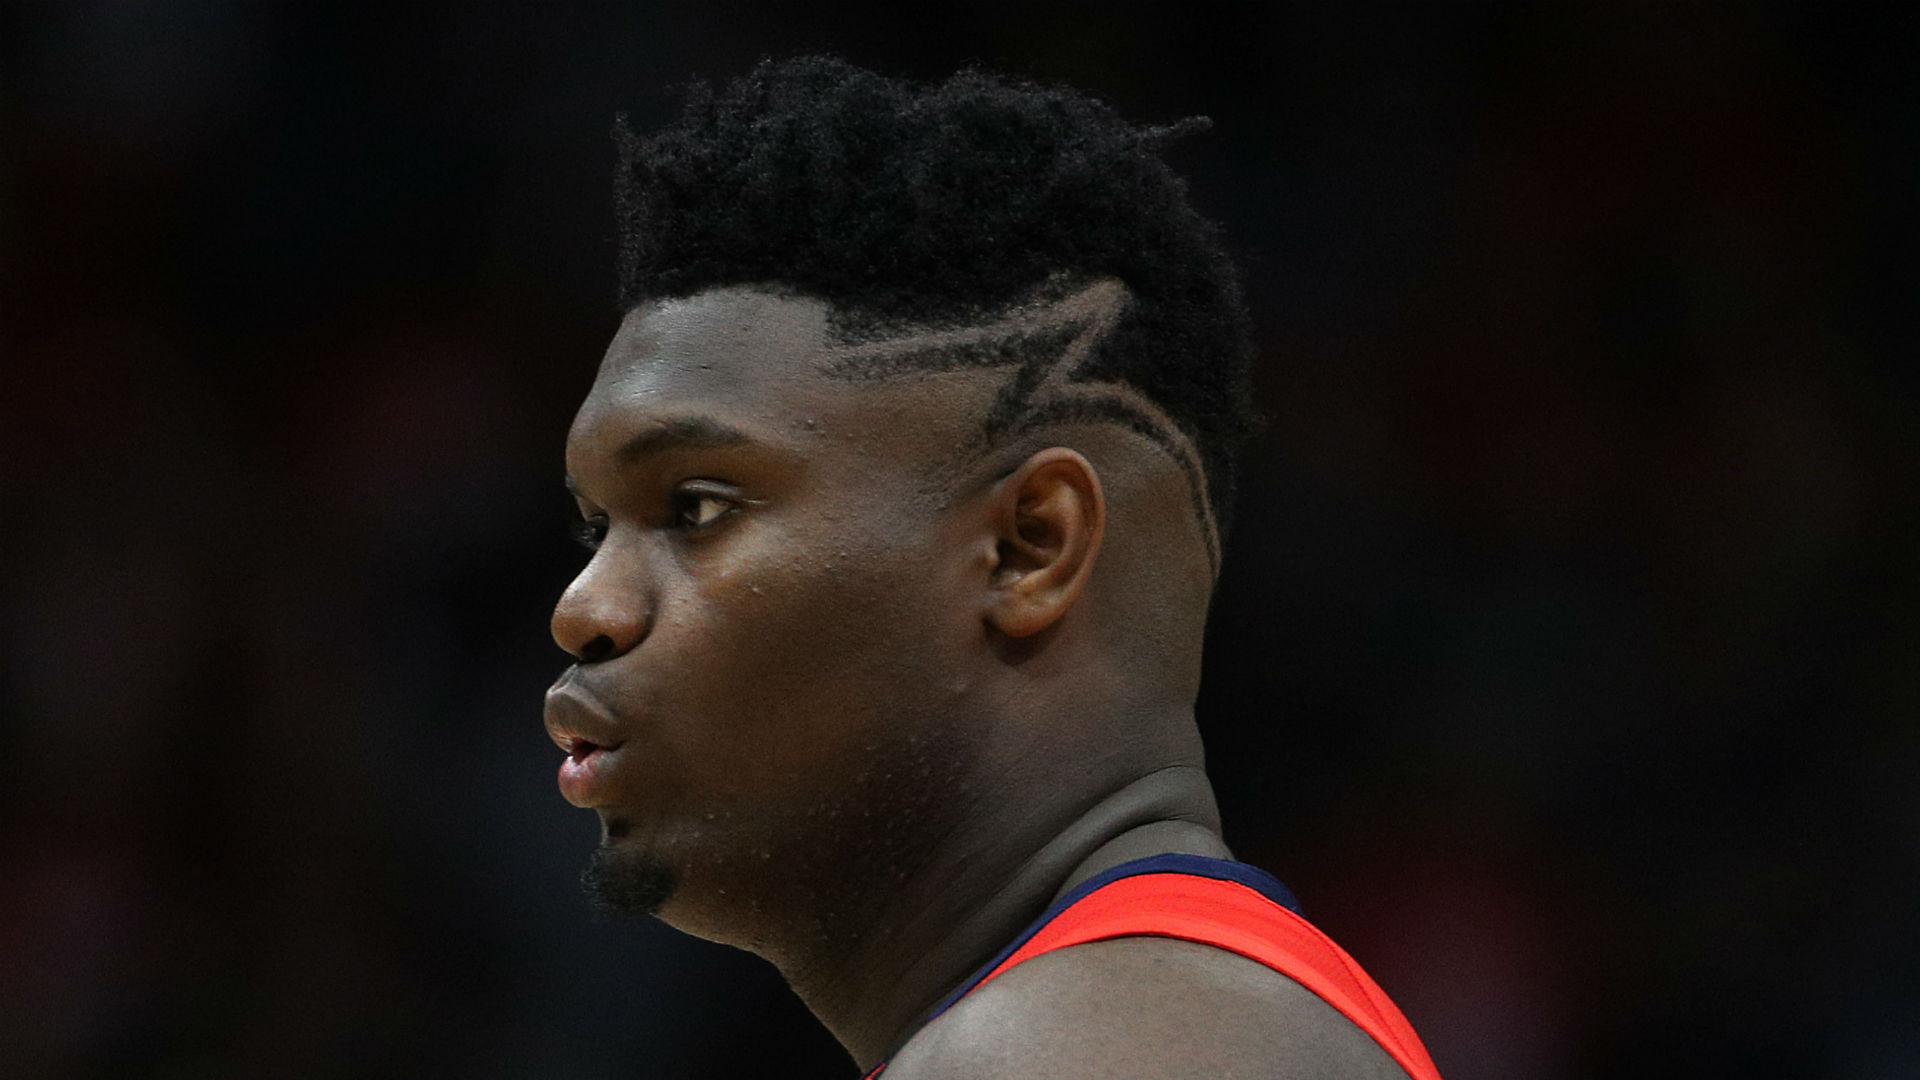 We take a look at how LeBron James, Michael Jordan and other NBA stars fared in their debuts after Zion Williamson's eye-catching display.